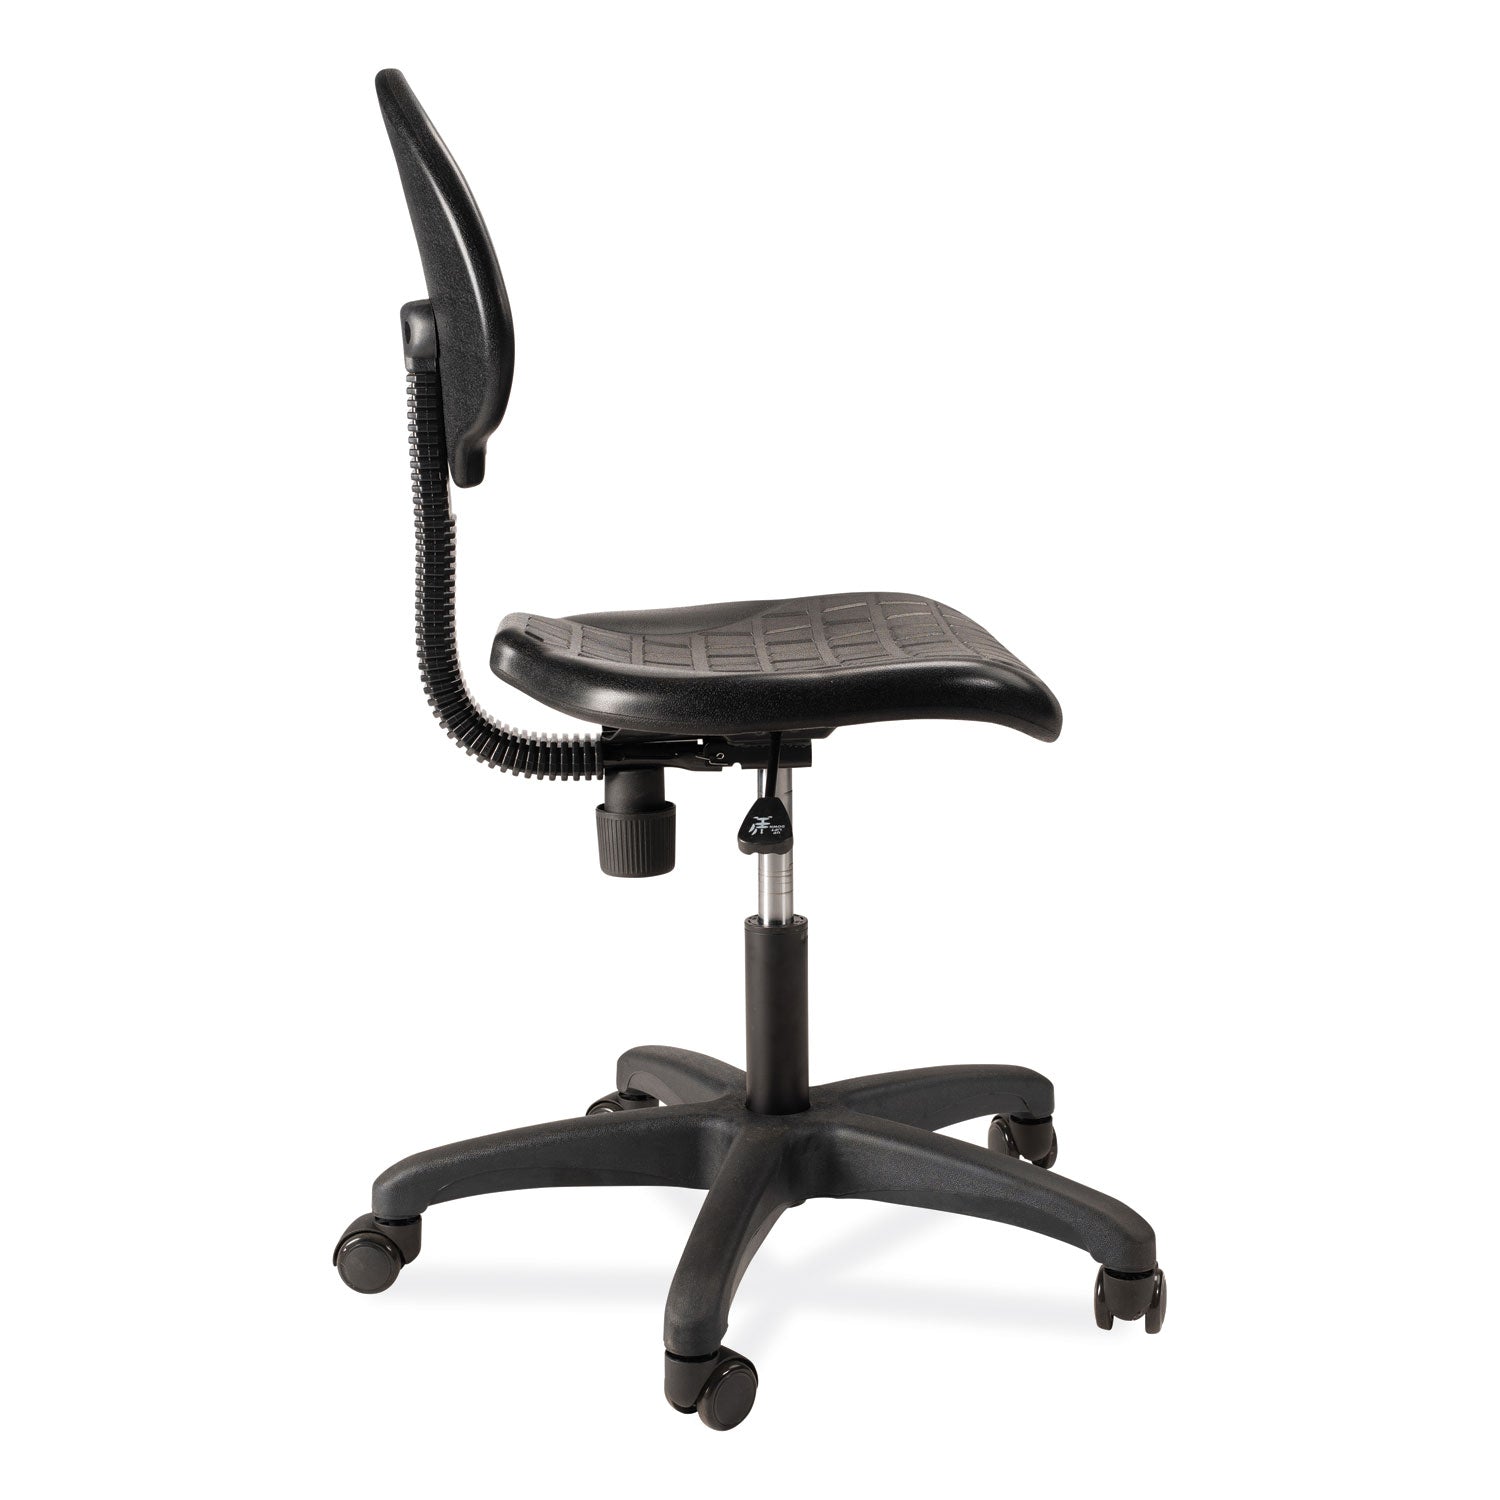 6700-series-polyurethane-adj-height-task-chair-supports-300-lb-16-21-seat-ht-black-seat-back-base-ships-in-1-3-bus-days_nps6716hb - 4